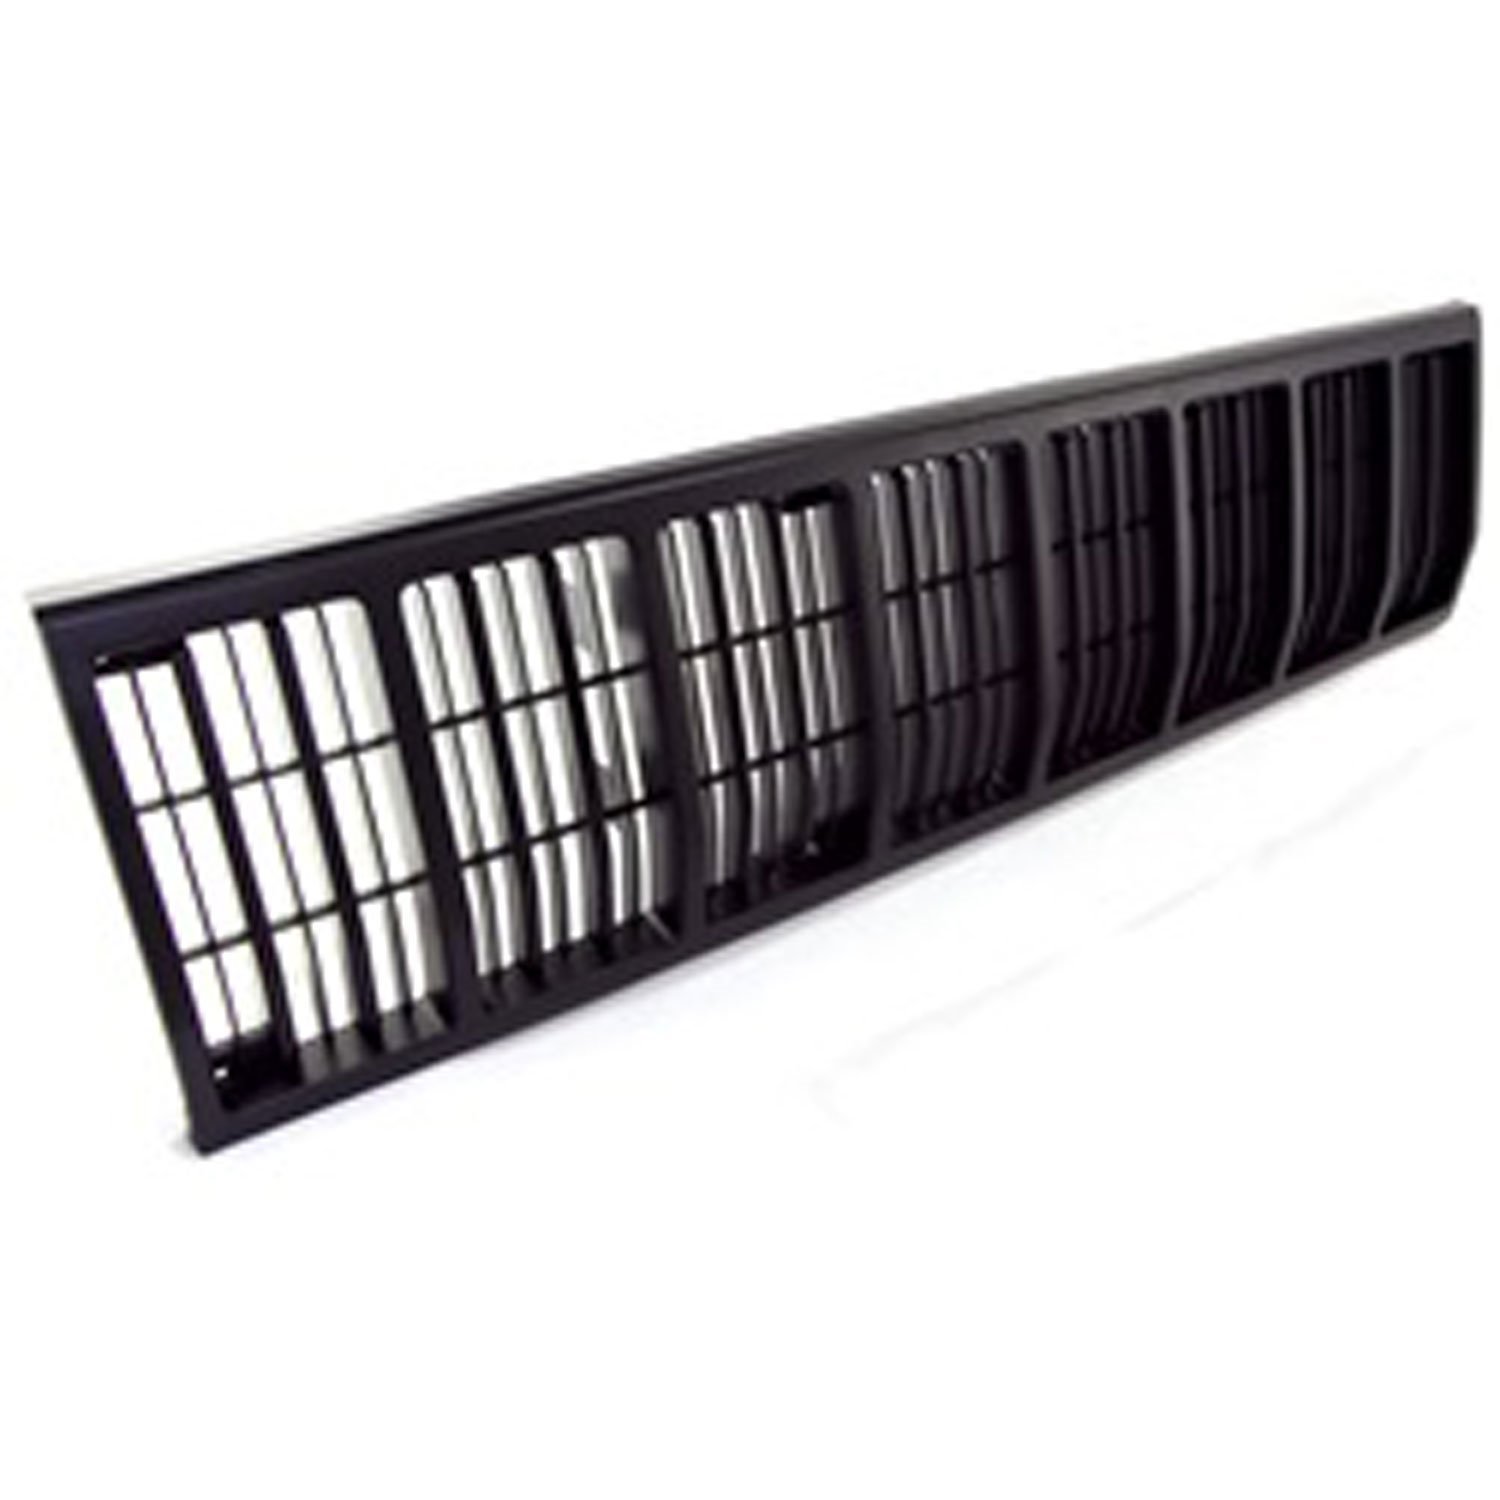 This black grille insert from Omix-ADA fits 88-90